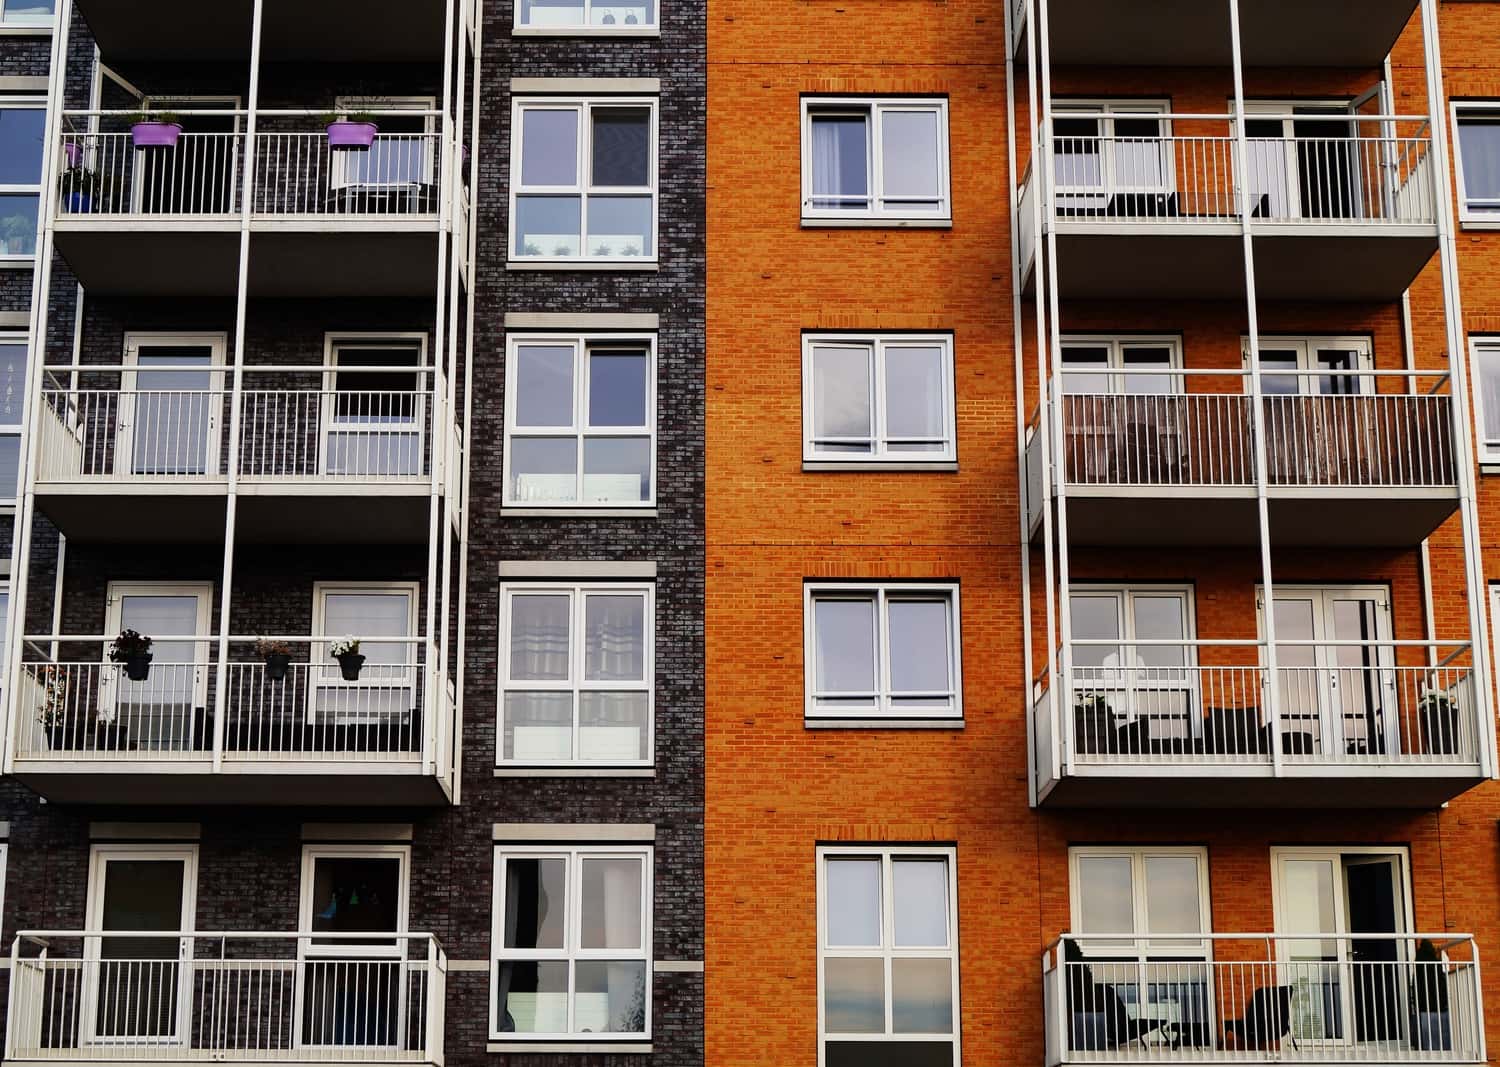 image of the front of a building with balconies | COMMUNICATIONS ASSOCIATE ELECTRIFICATION TEAM CLIMATE NEXUS